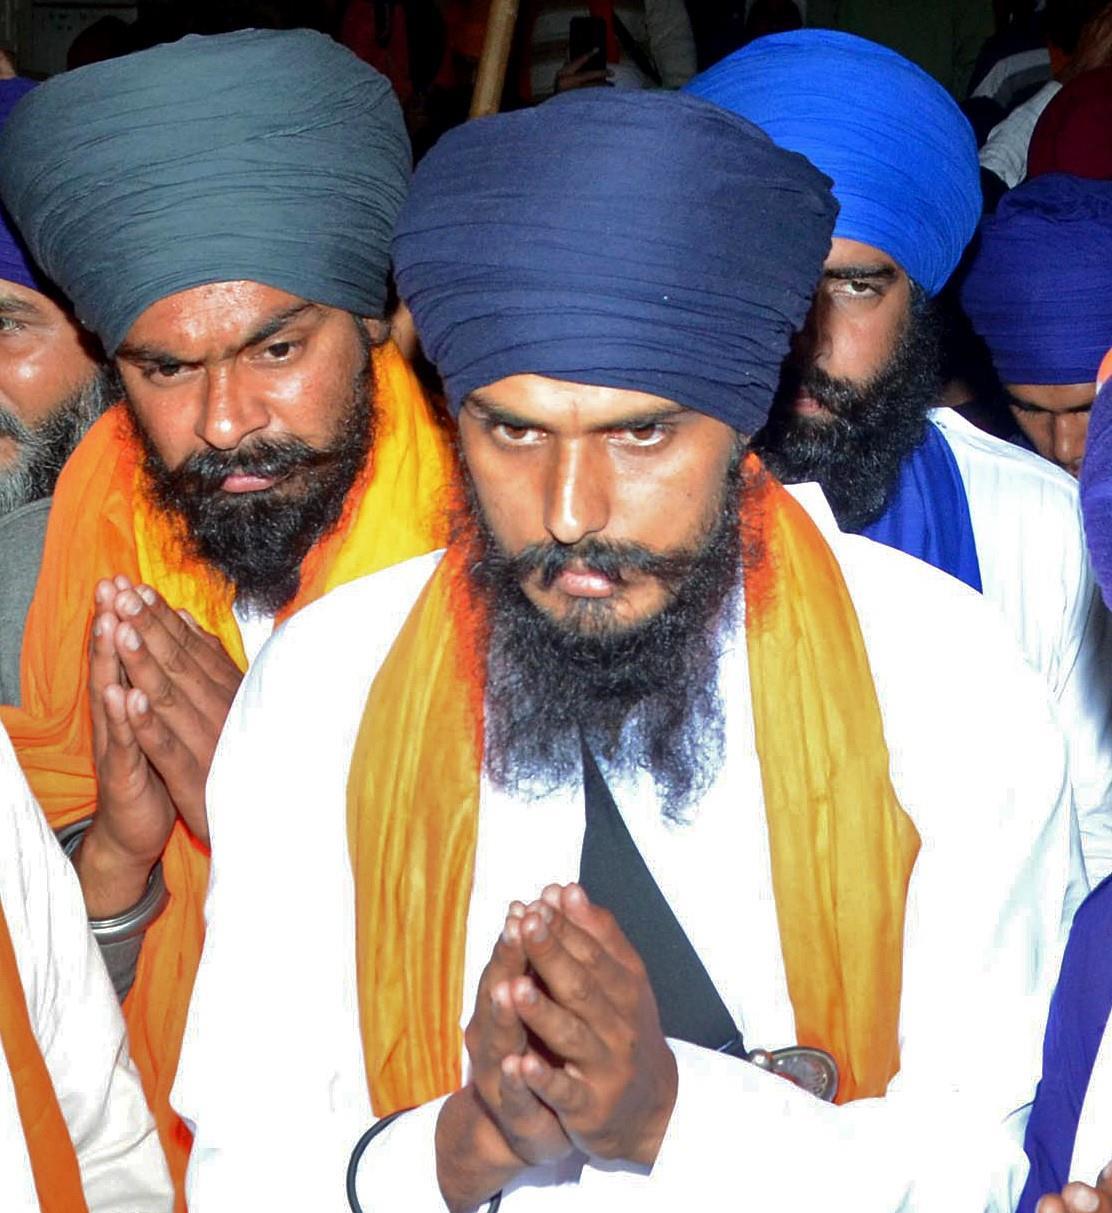 Doaba hit by operation against Amritpal Singh, aides